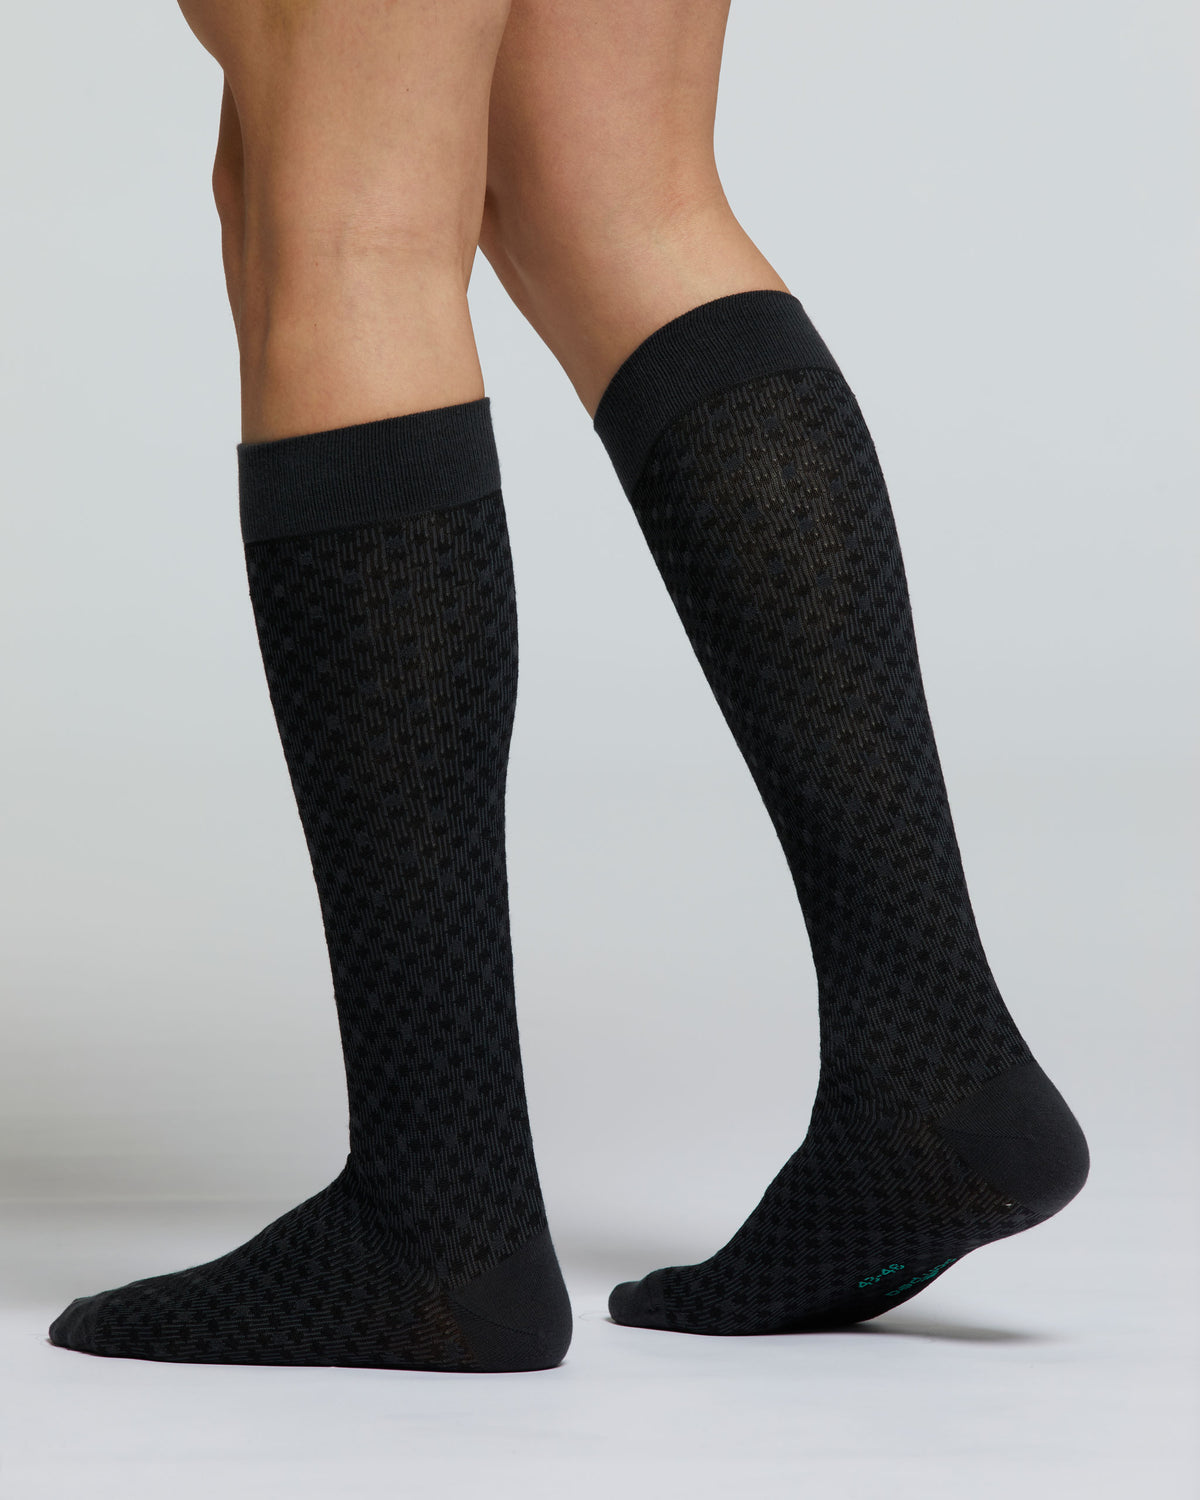 CHAUSSETTES LONGUES COING COING MOTIF NŒUD